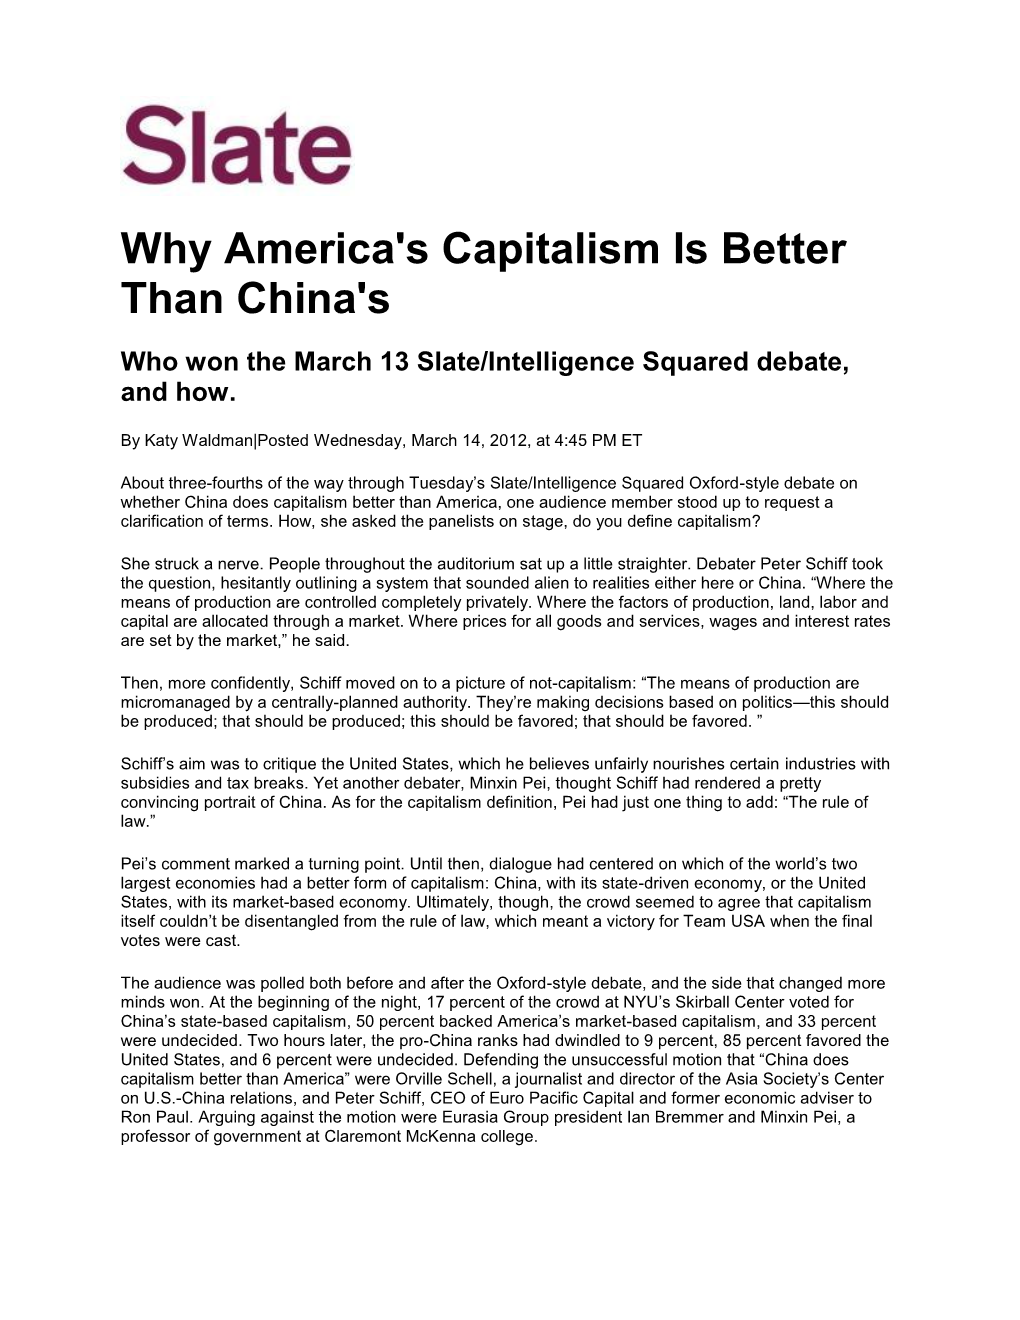 Why America's Capitalism Is Better Than China's